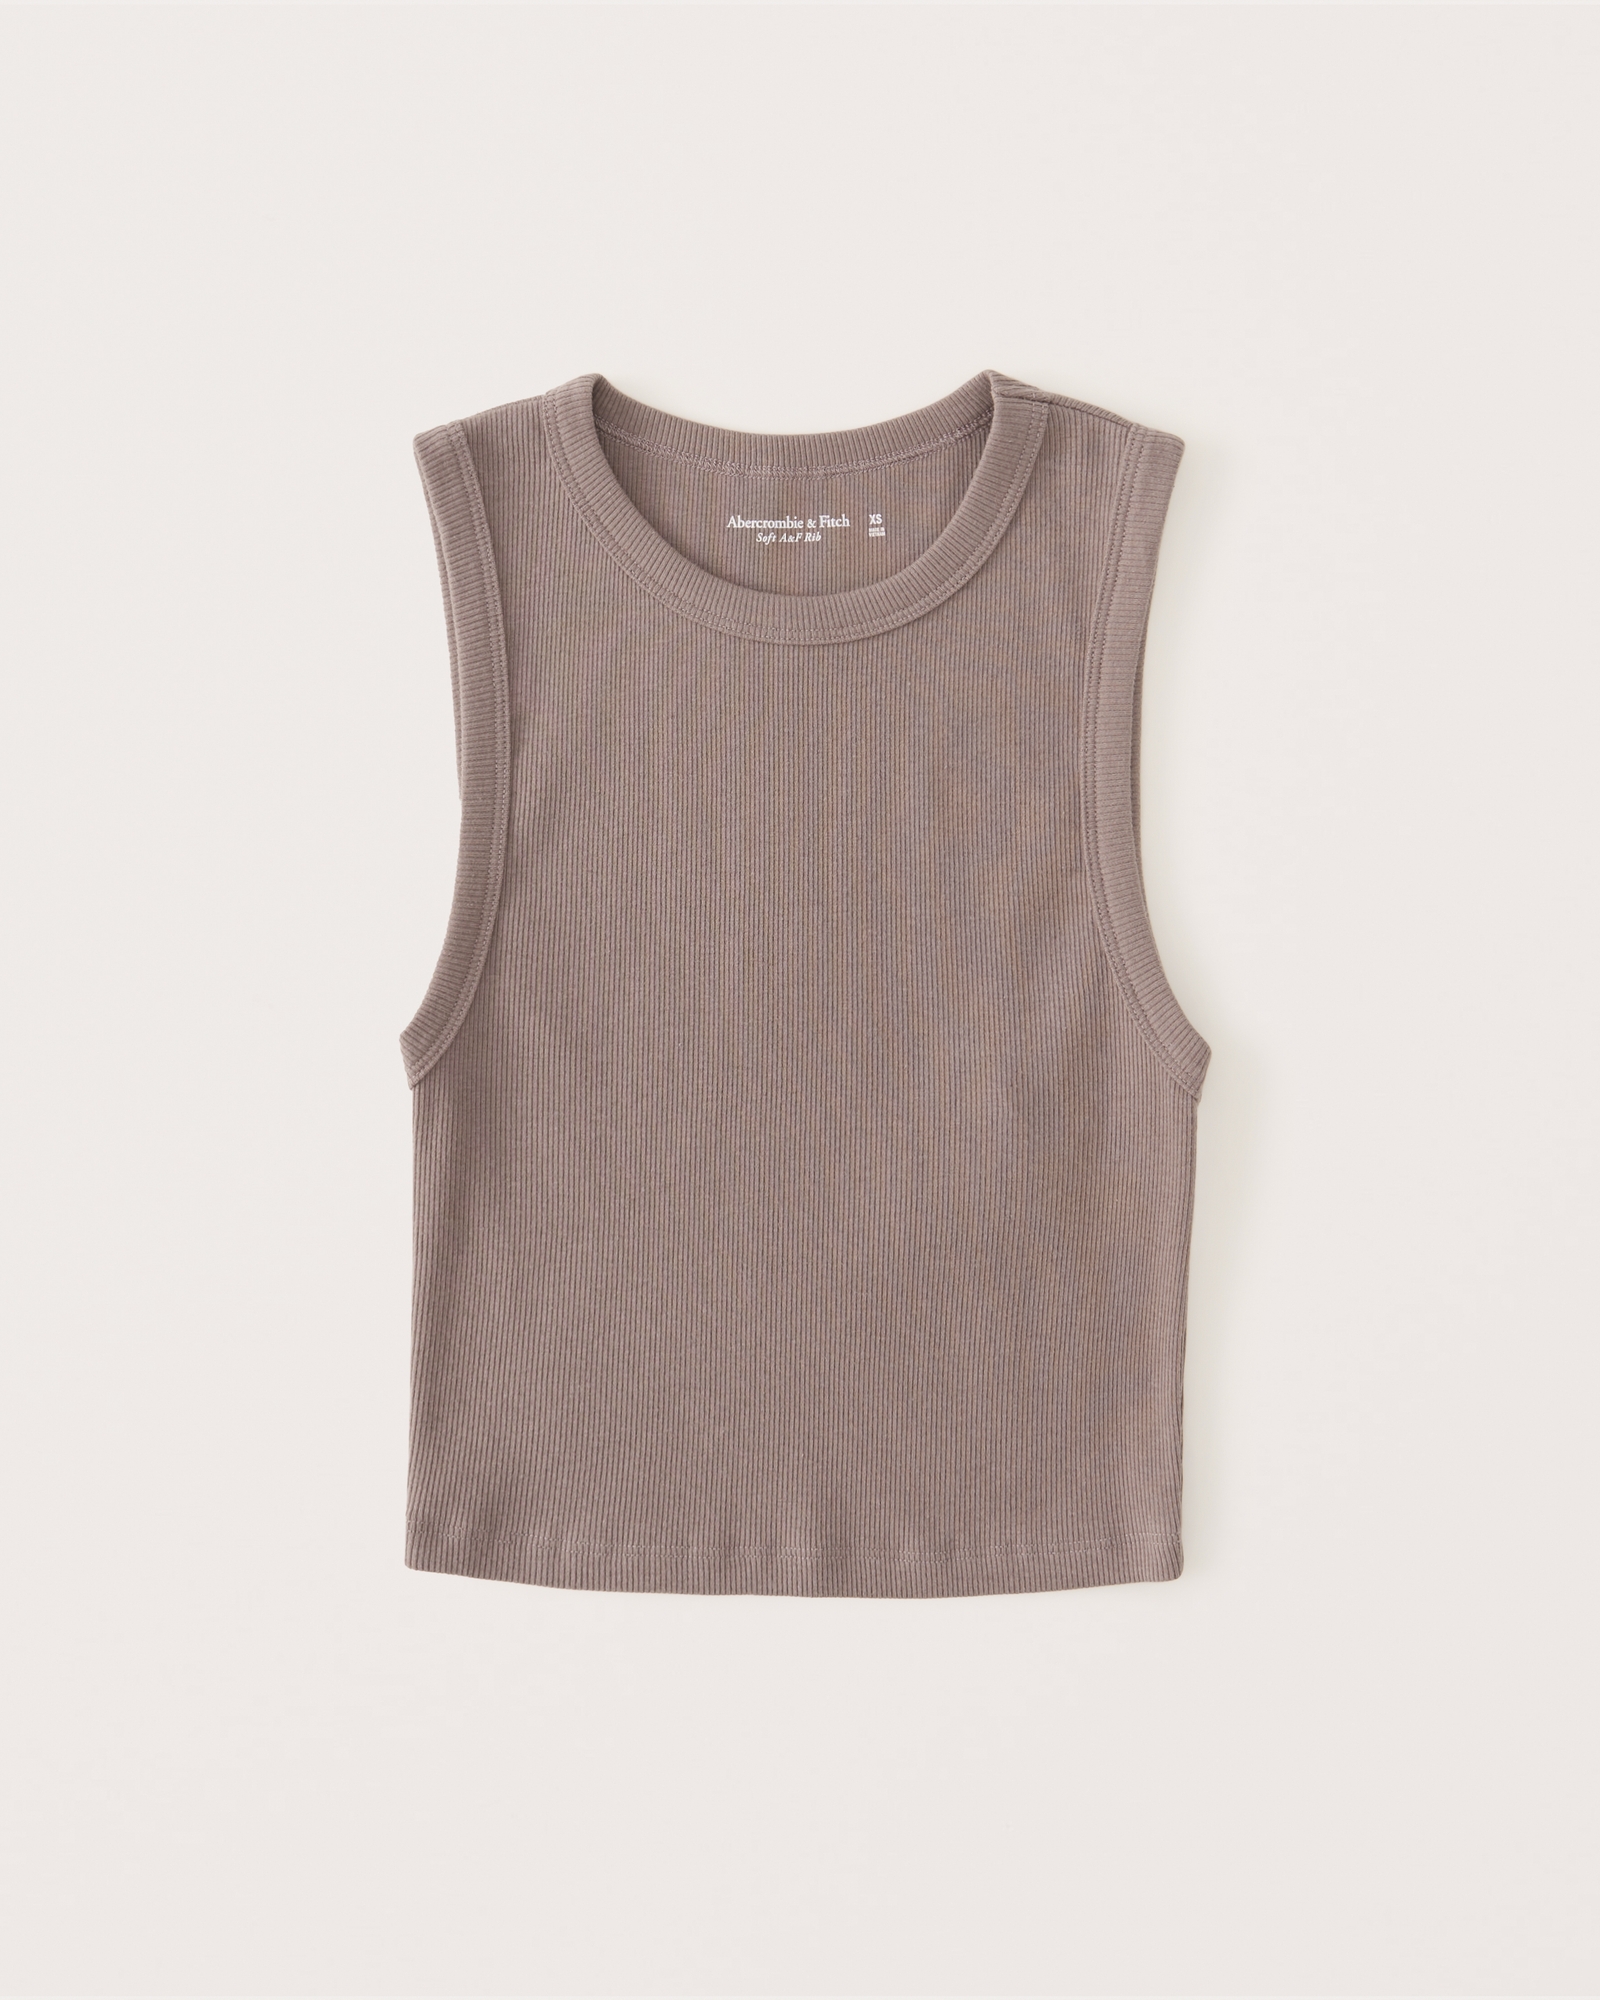 Abercrombie & Fitch Women's Cropped Crew Tank